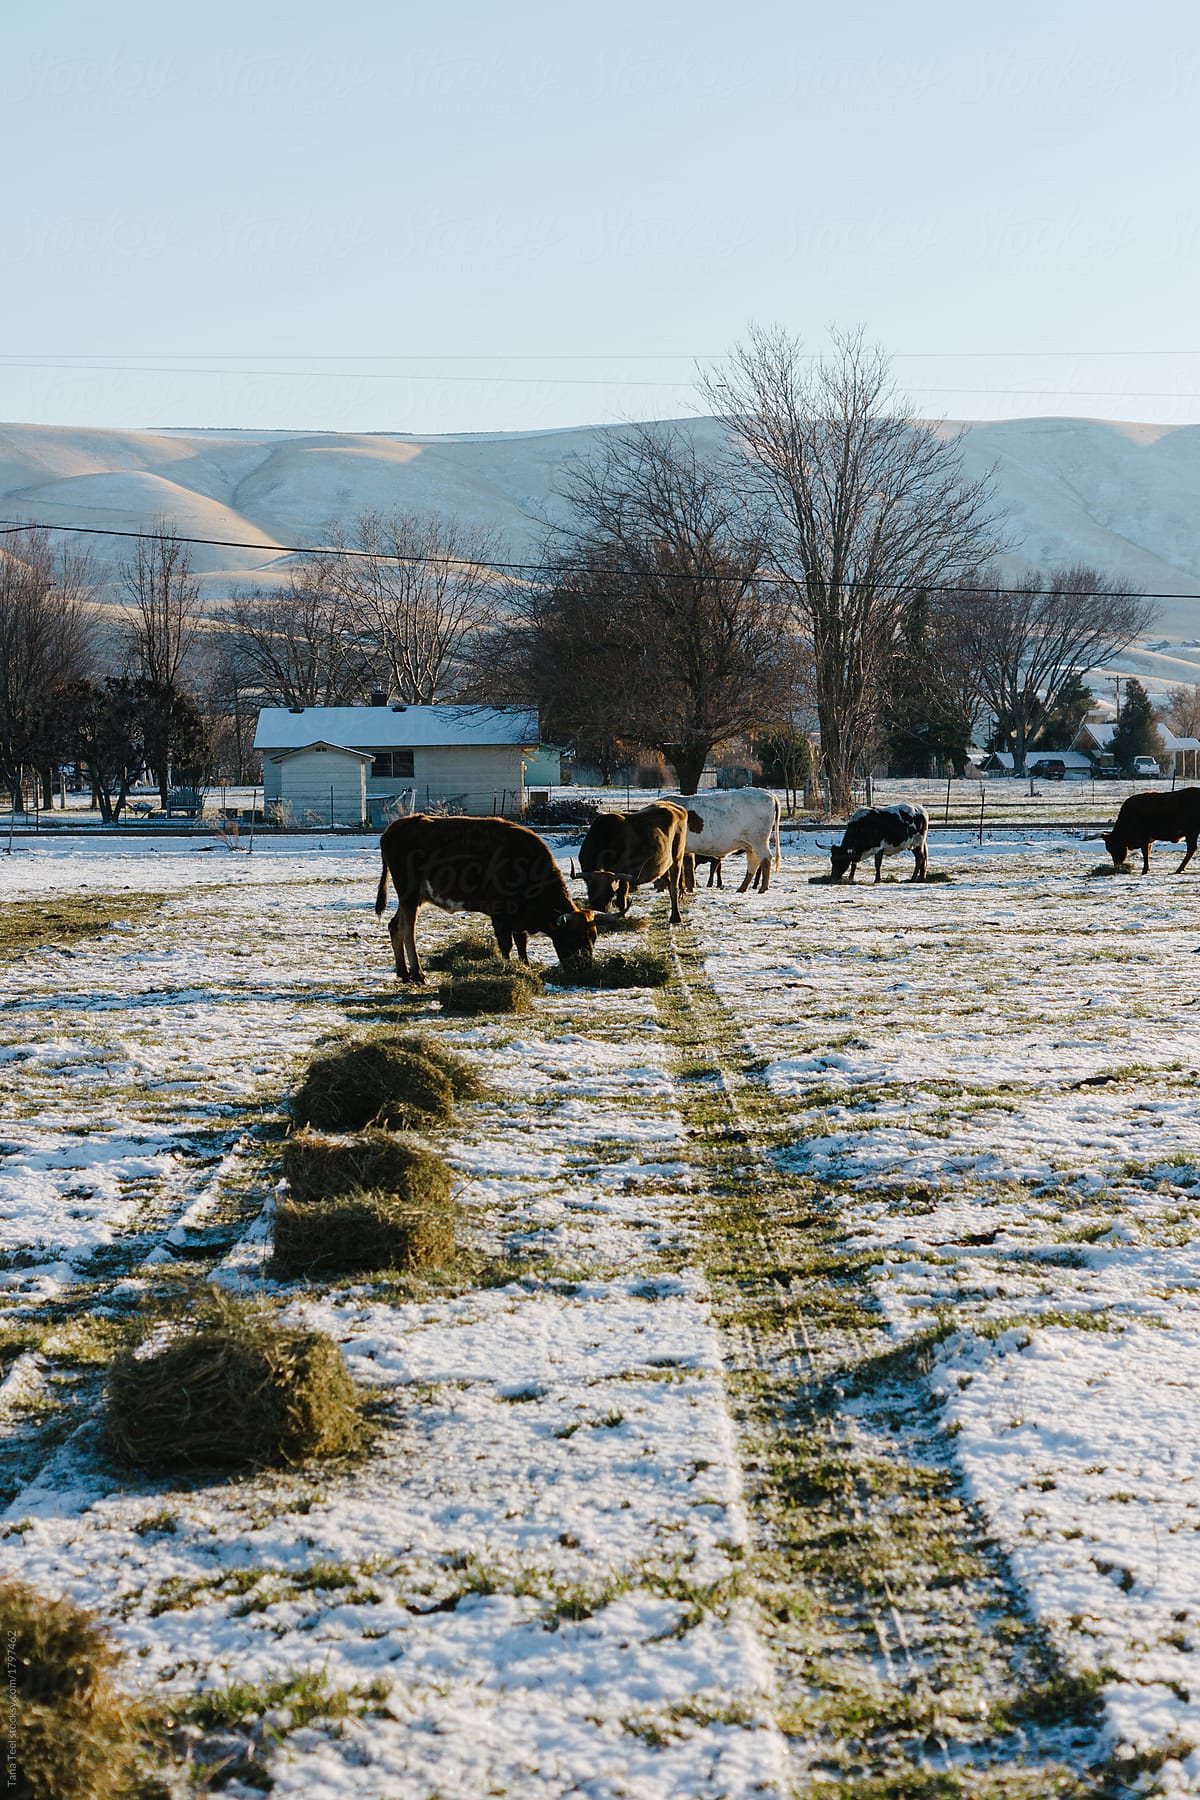 cows lined up eating hay in snowy pasture